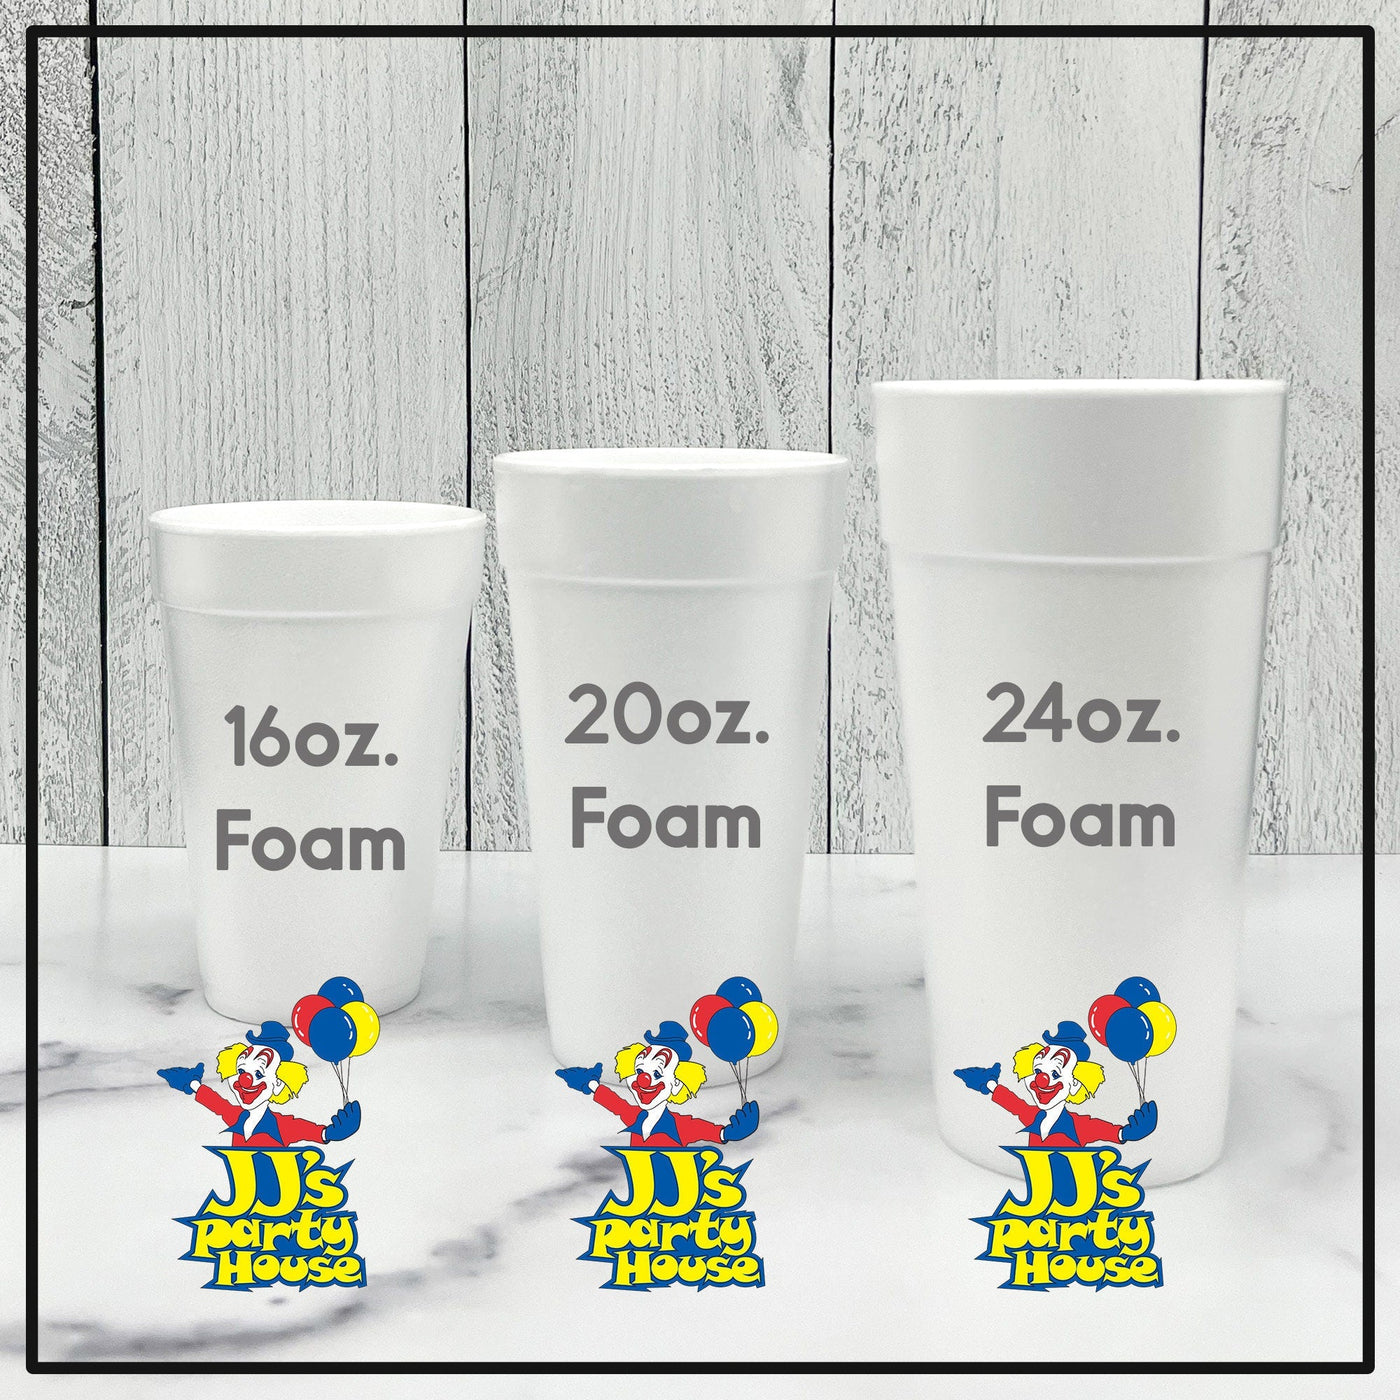 America Y'all Patriotic Summer 24oz Foam Barbecue Cups 25ct - Land of the Free Home of the Brave - JJ's Party House